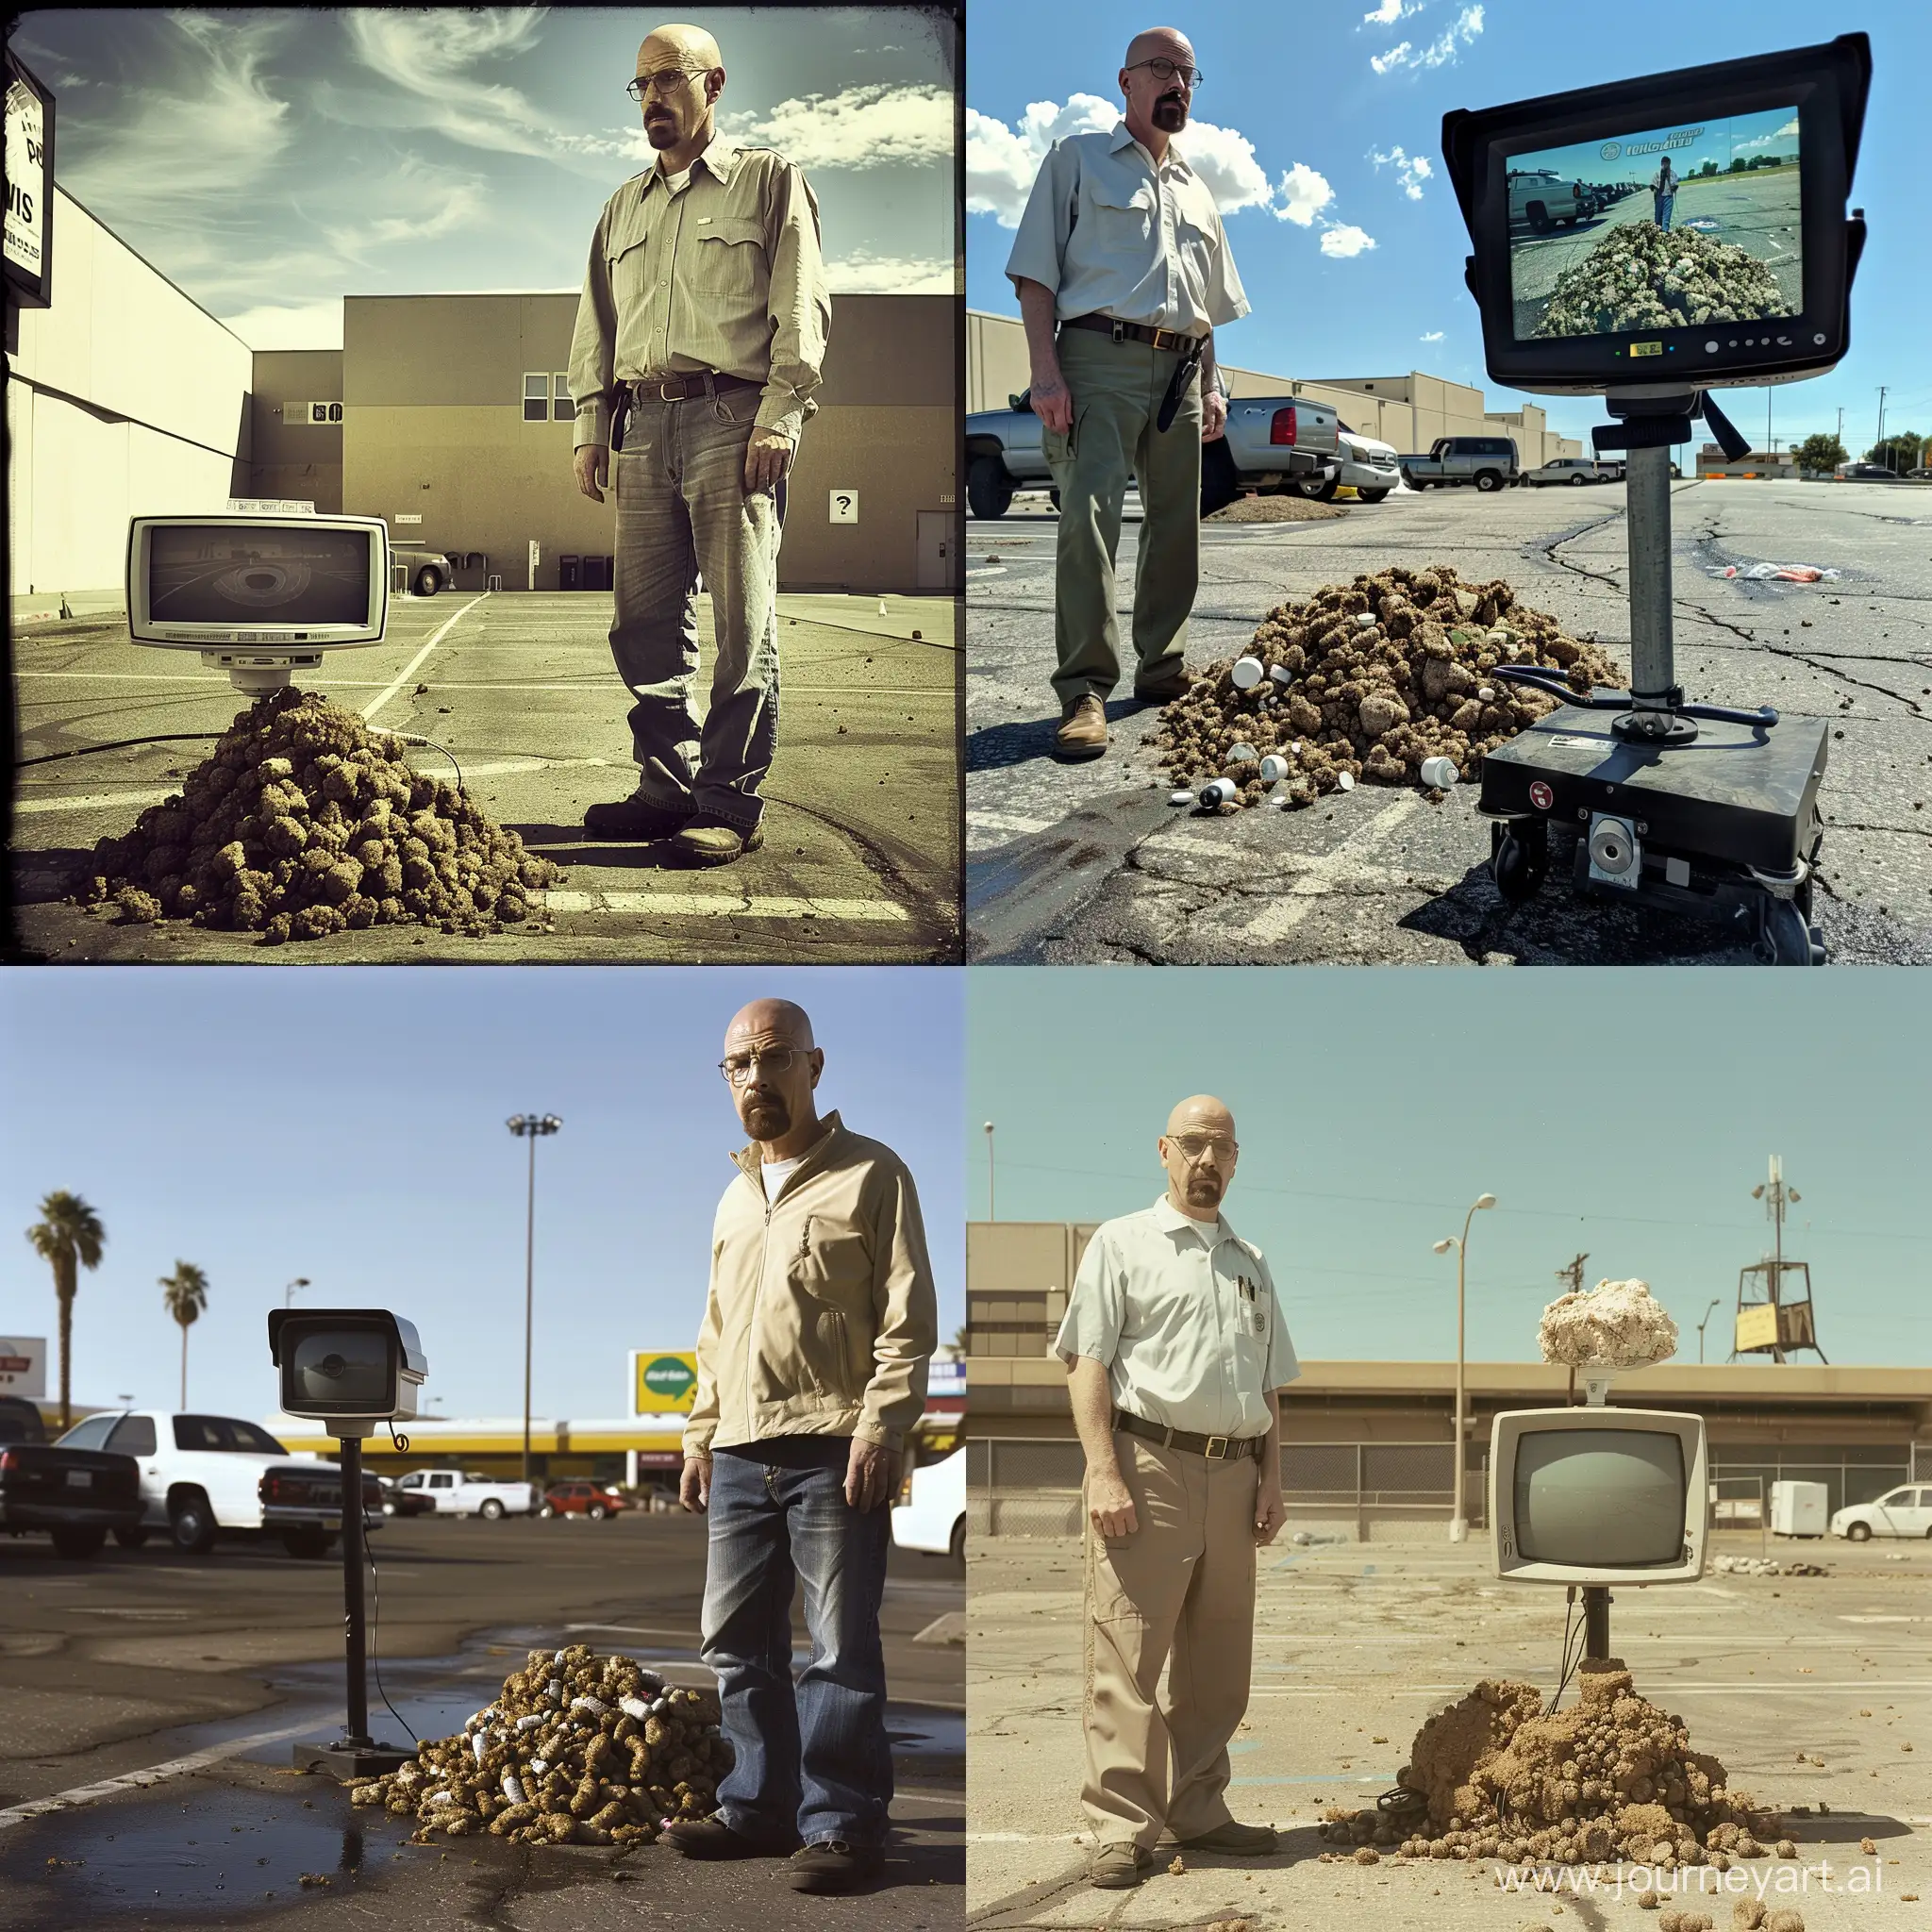 Walter White standing next to a pile of poop in the parking lot, cctv monitor